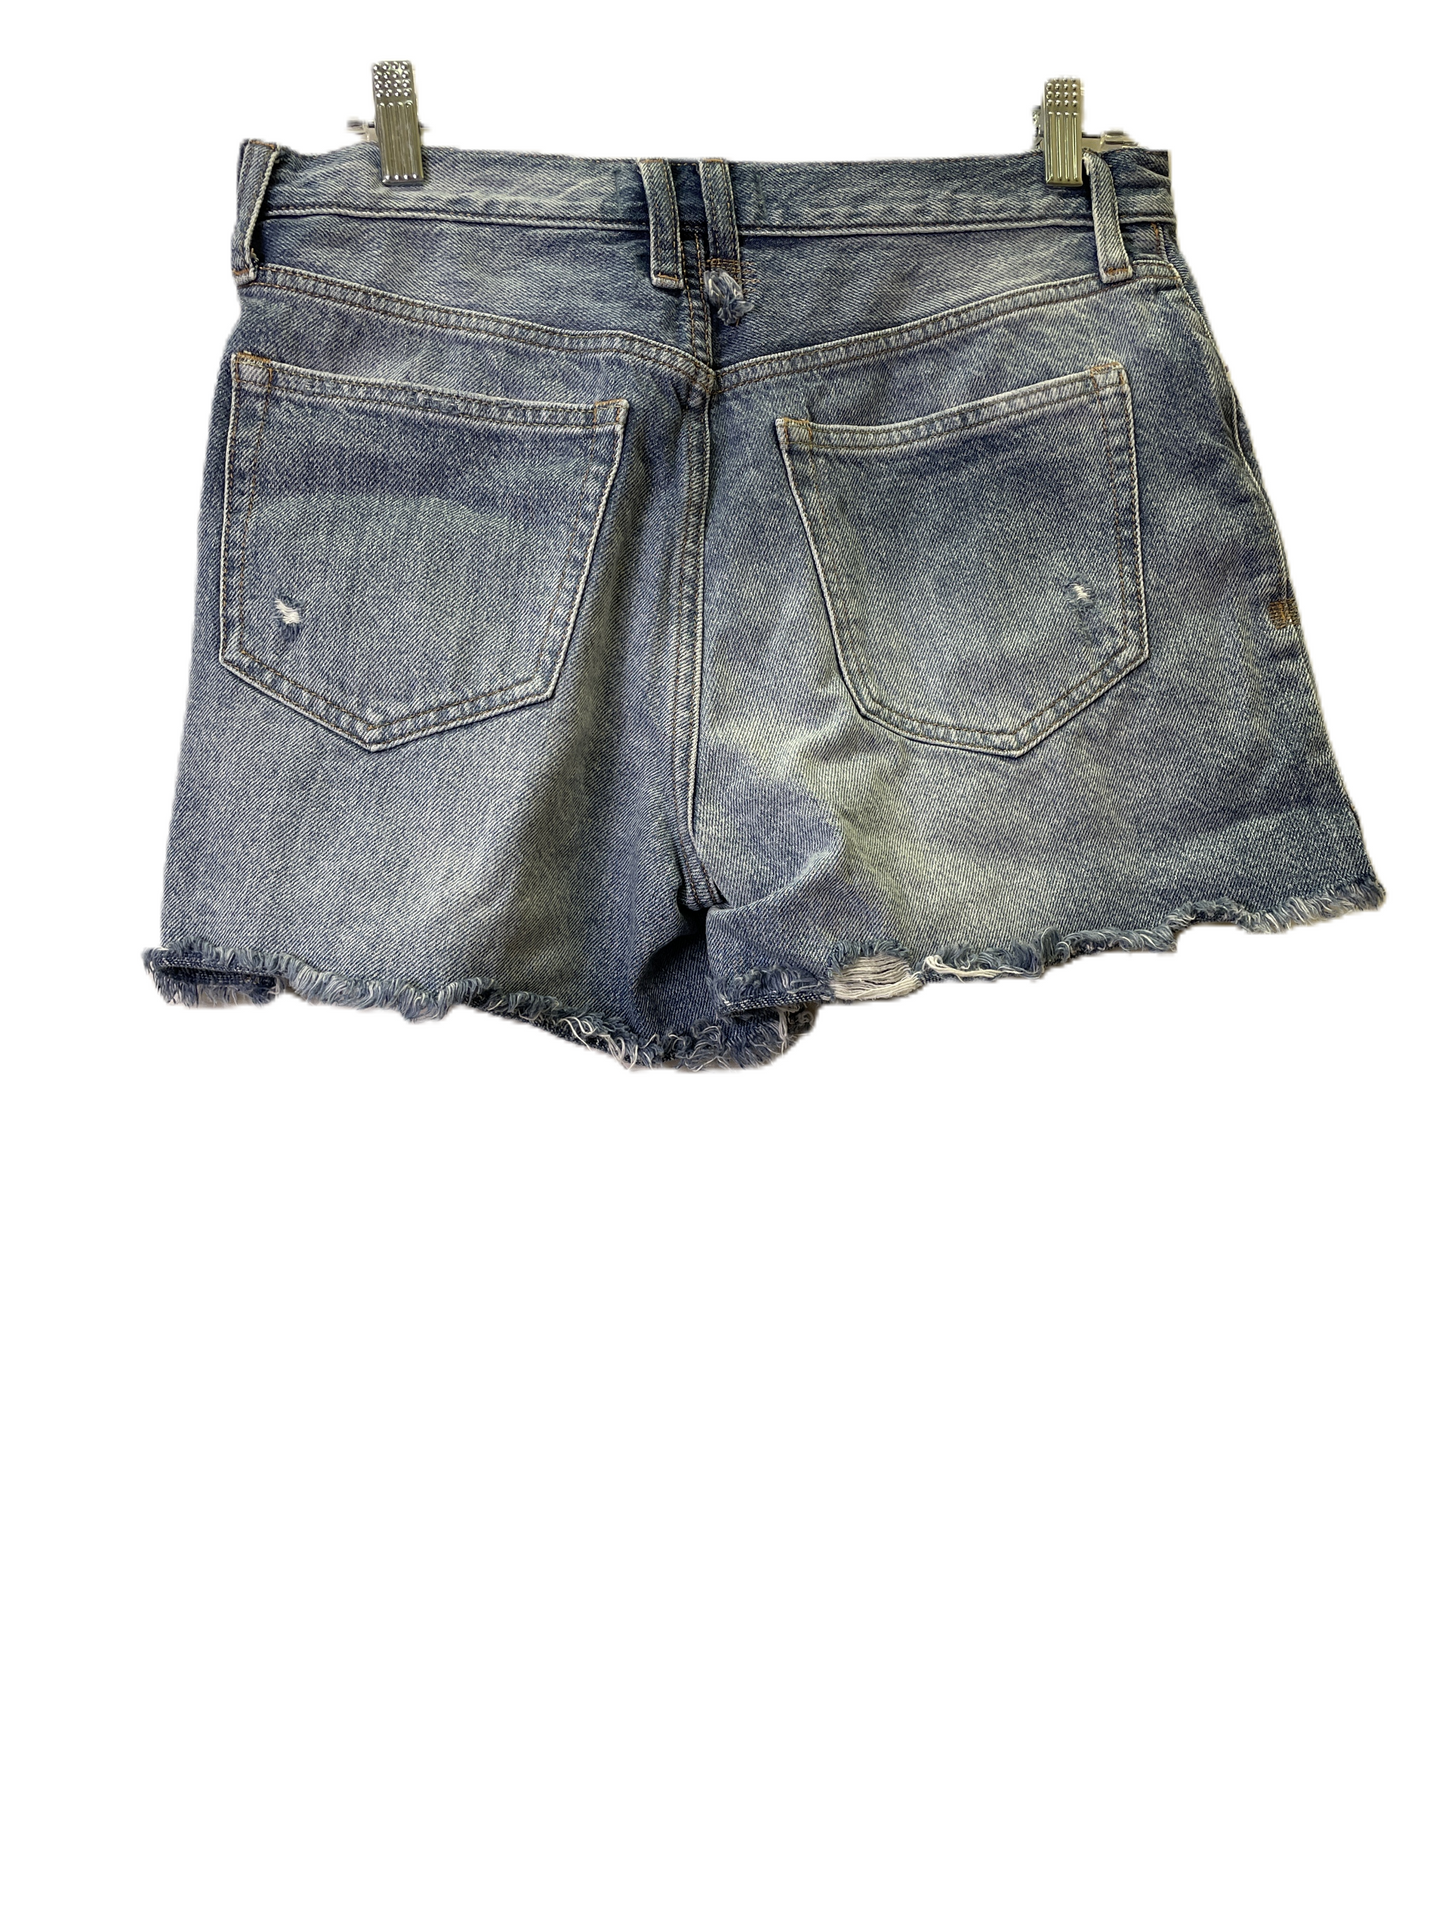 Blue Denim Shorts By We The Free, Size: 8